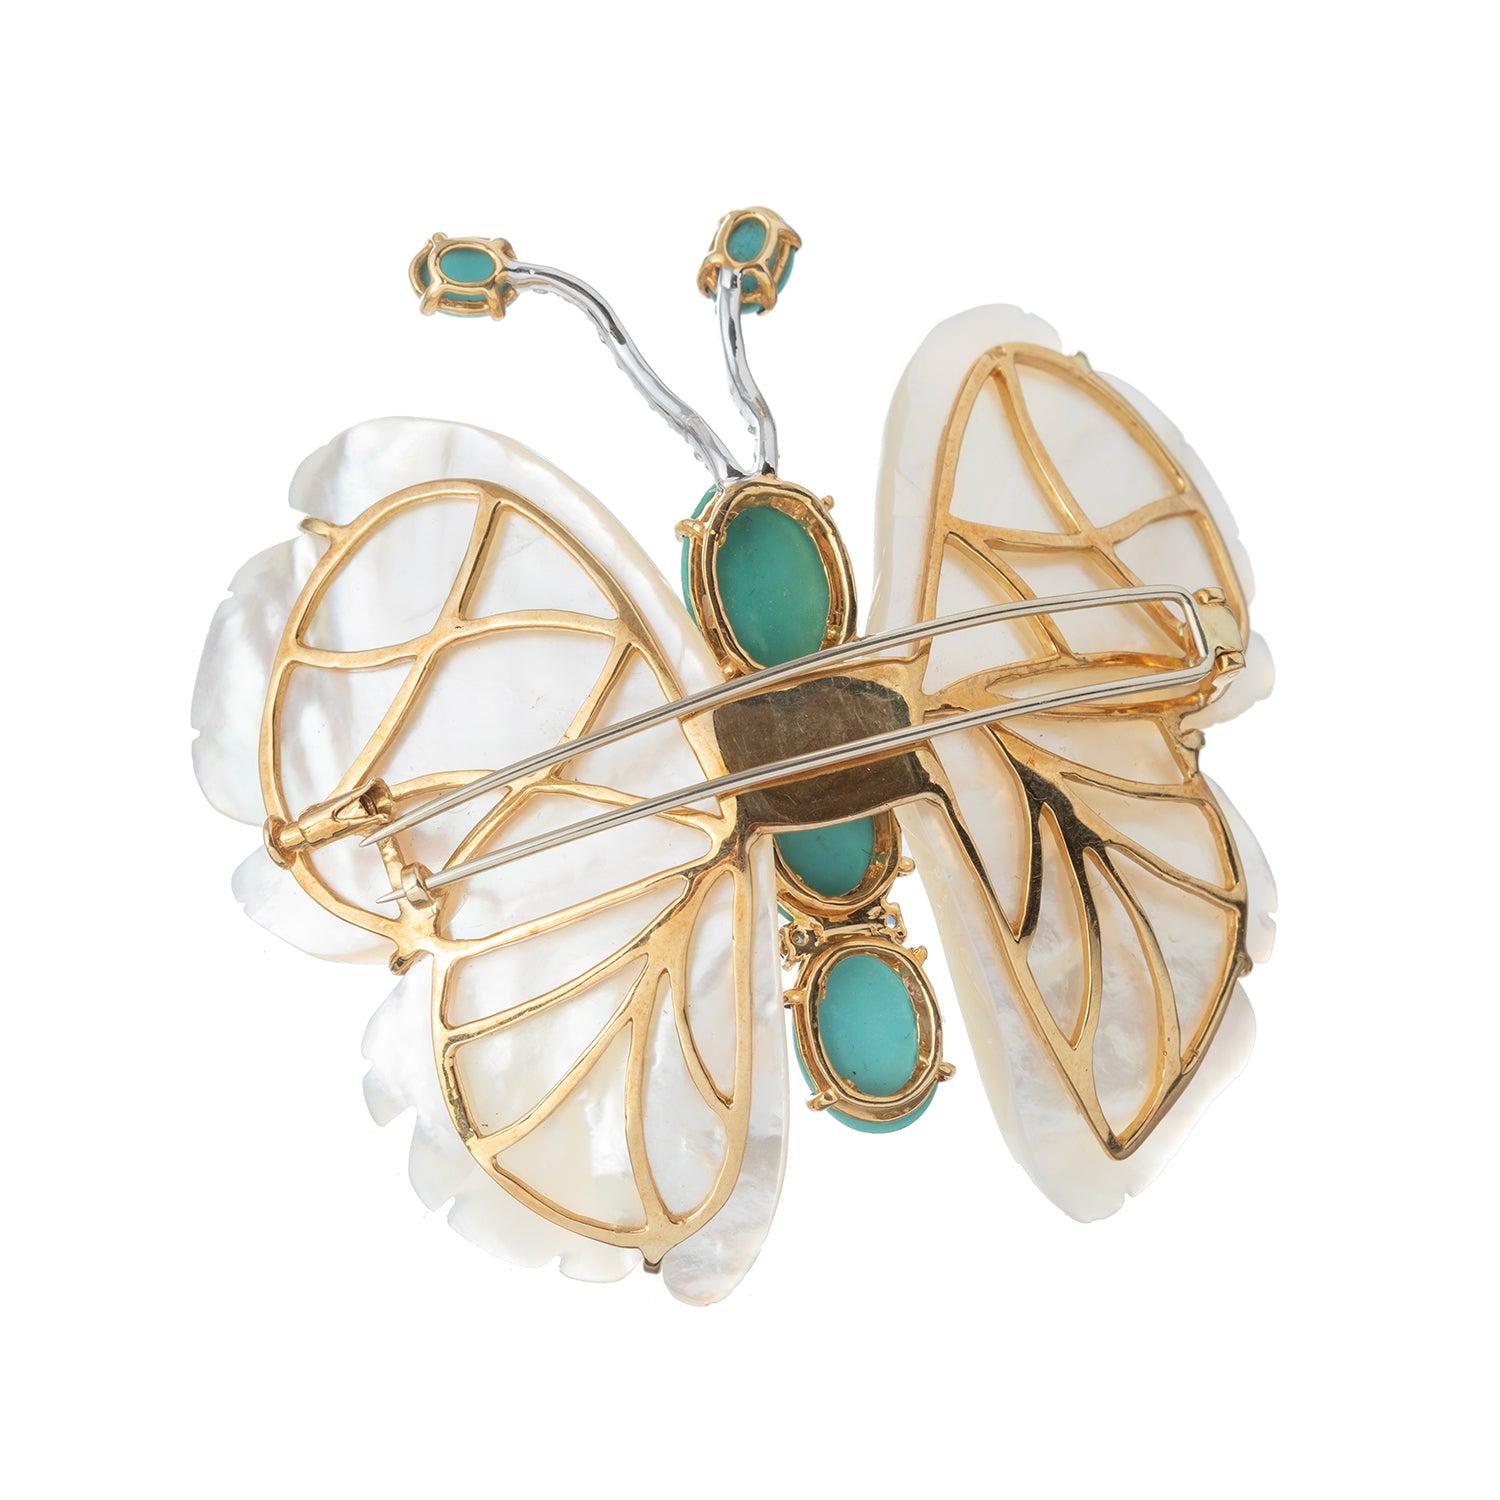 Butterfly brooch, featuring carved mother-of-pearl wings and oval-shaped cabochon turquoise body, as well as round-cut diamond-set antennae ending in oval-shaped cabochon turquoise with four round, faceted, natural blue sapphire in between. Handmade